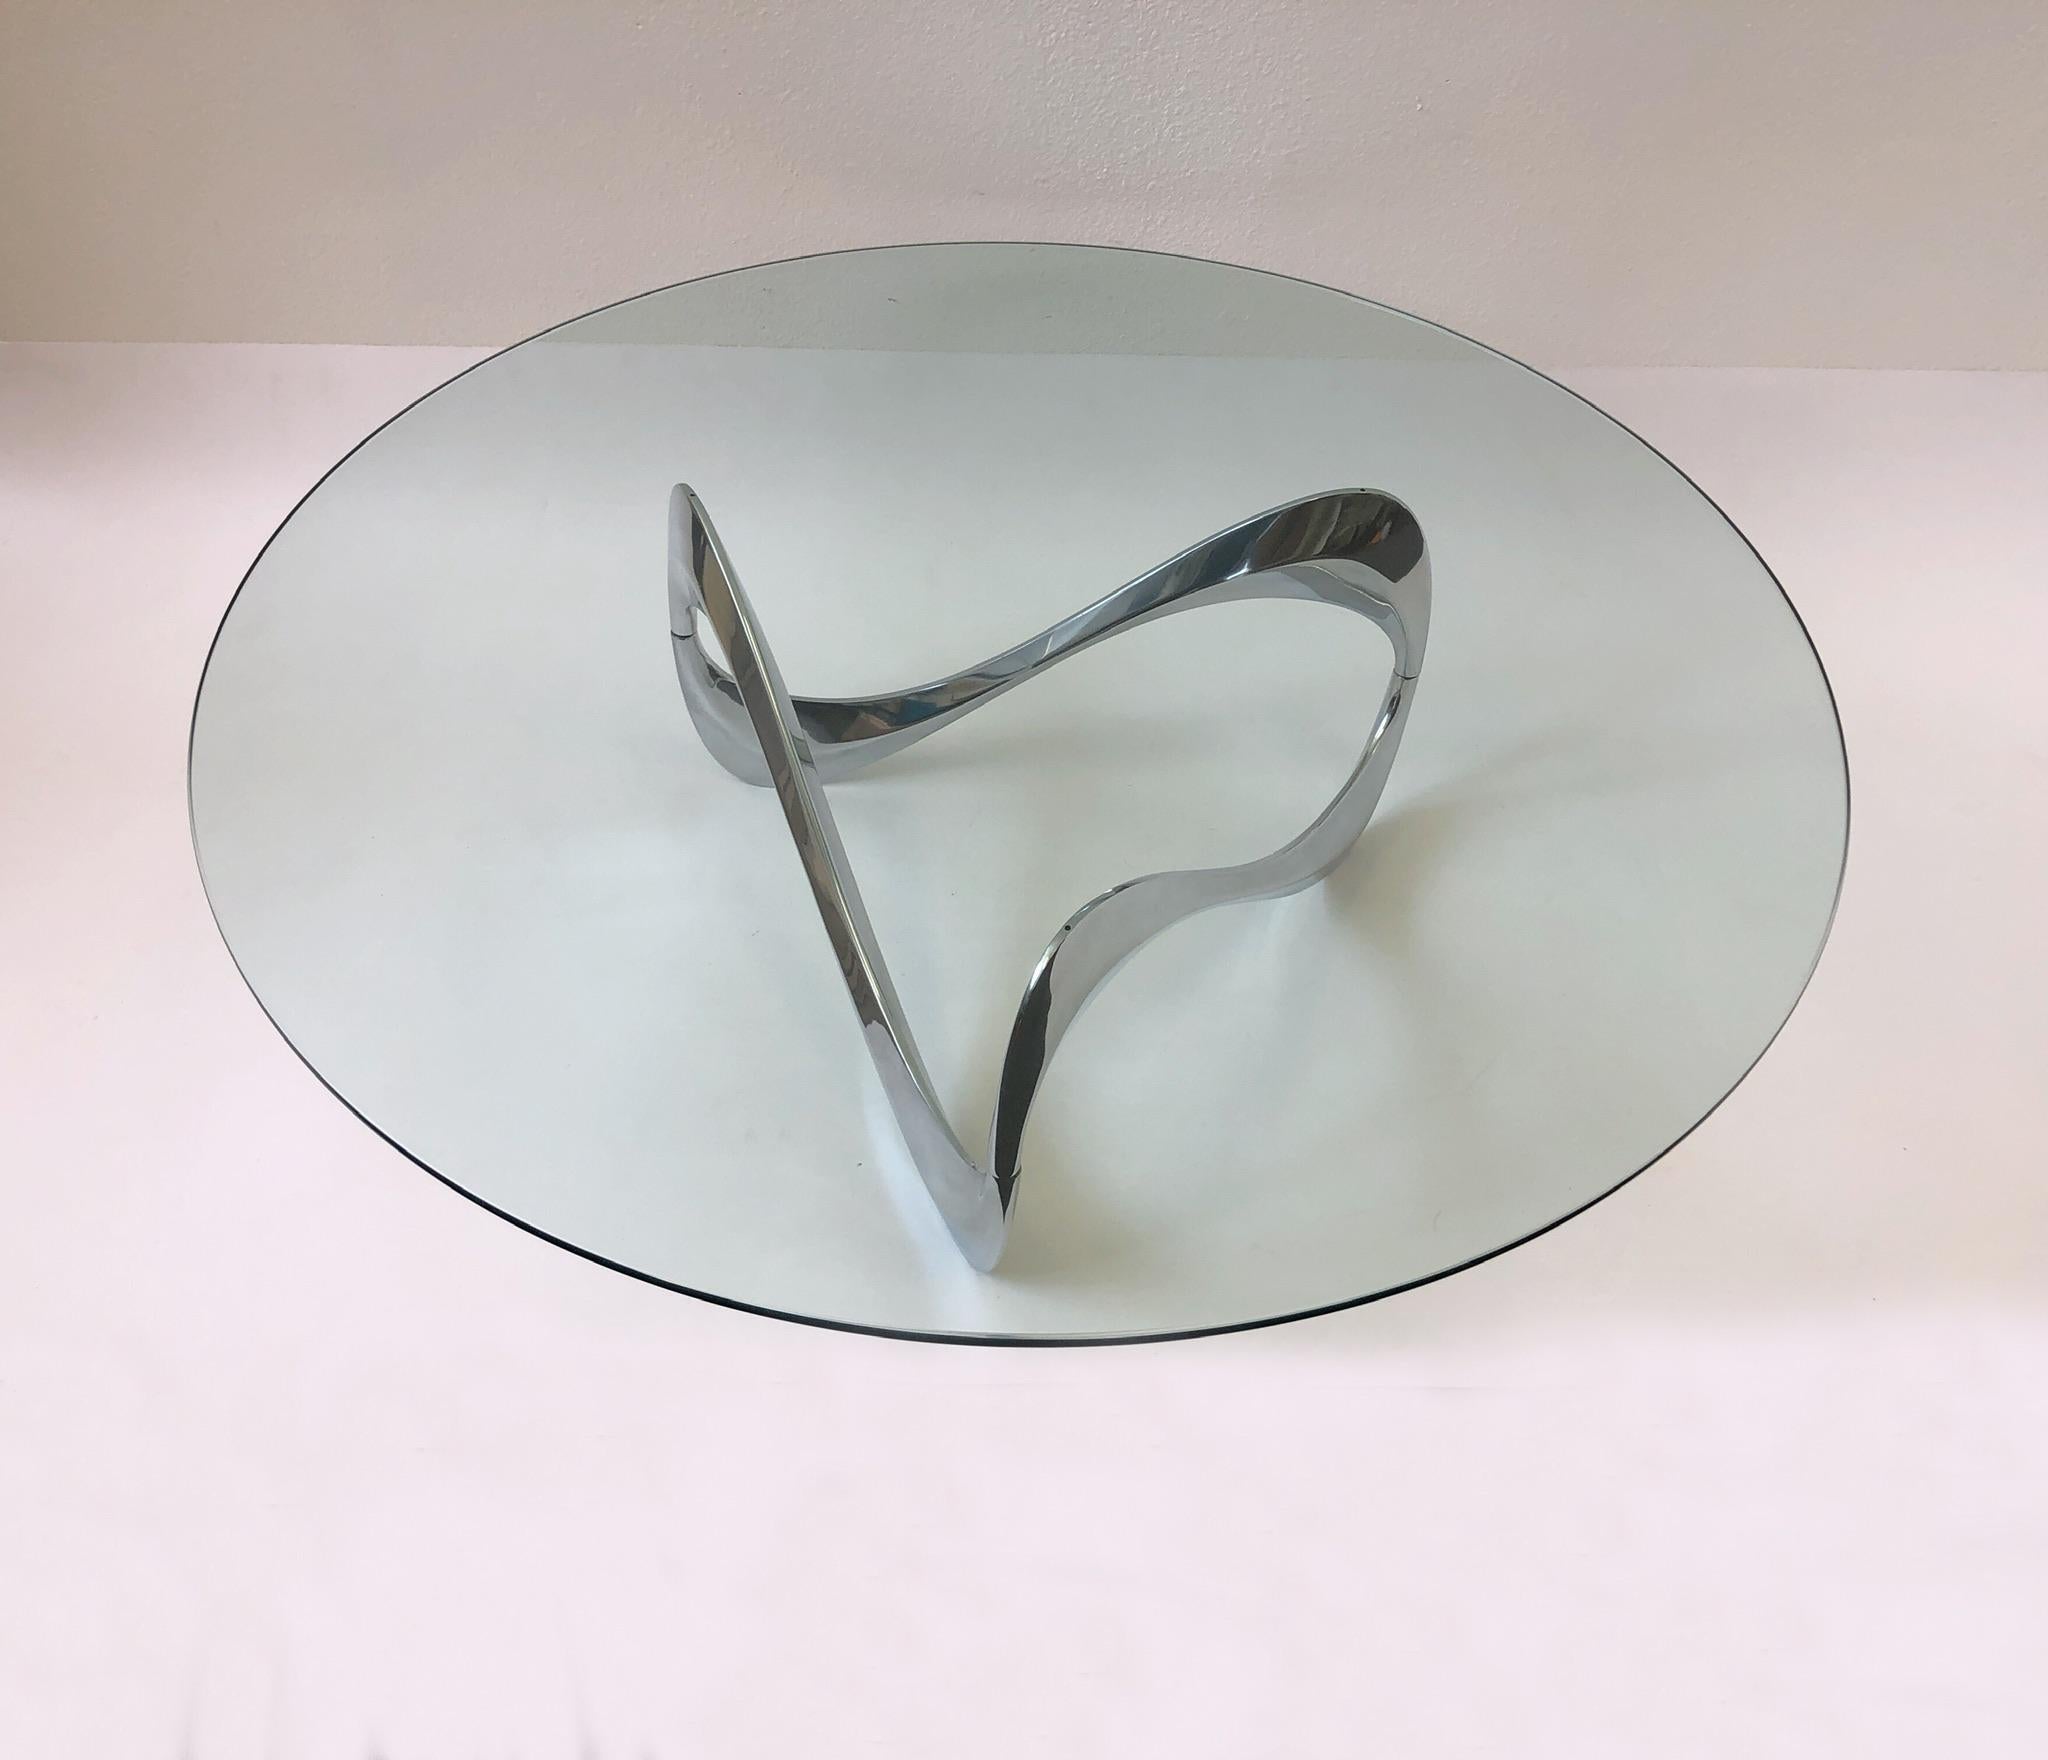 A sculptural polish aluminum and glass ‘Snake’ cocktail table. Design by German designer Knut Hesterberg in the 1960s. New 48” diameter 1/2” thick glass top. The base is newly professionally polished, but still show some age (see detail photos). The